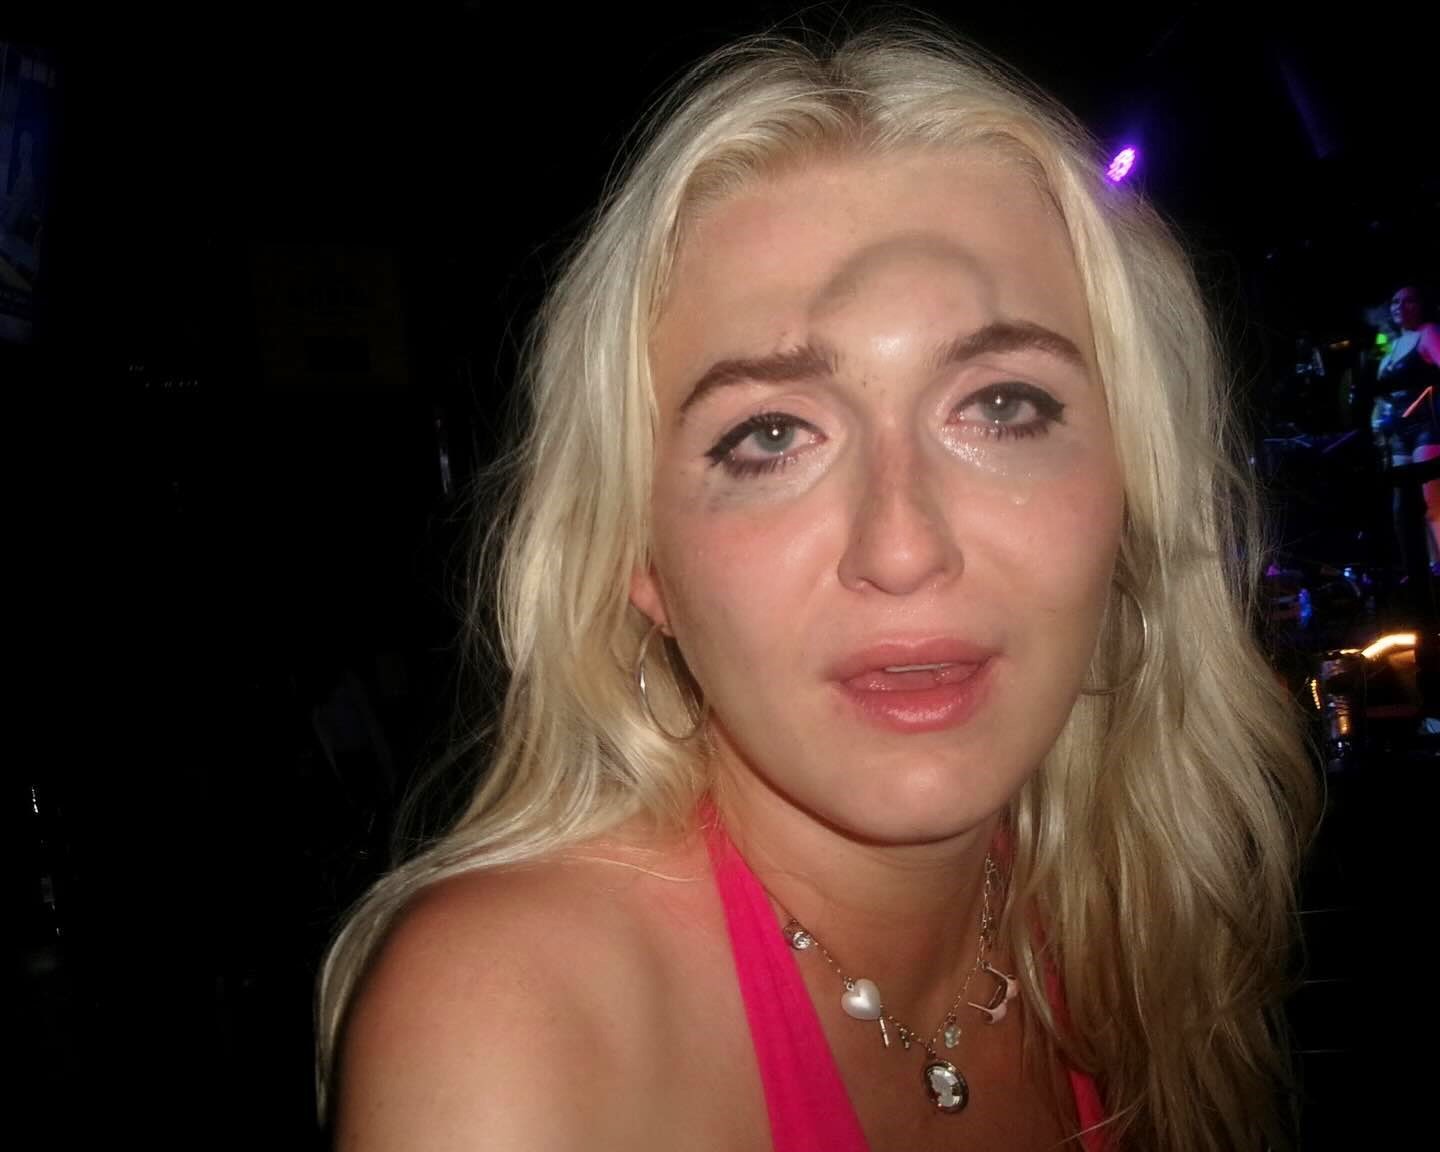 A 23-year-old woman, Lexi DiLucia, ended a night out with a massive forehead bump after a splits fail at a club. Her viral video, with 7.4m views, captures the hilarious moment and the aftermath.